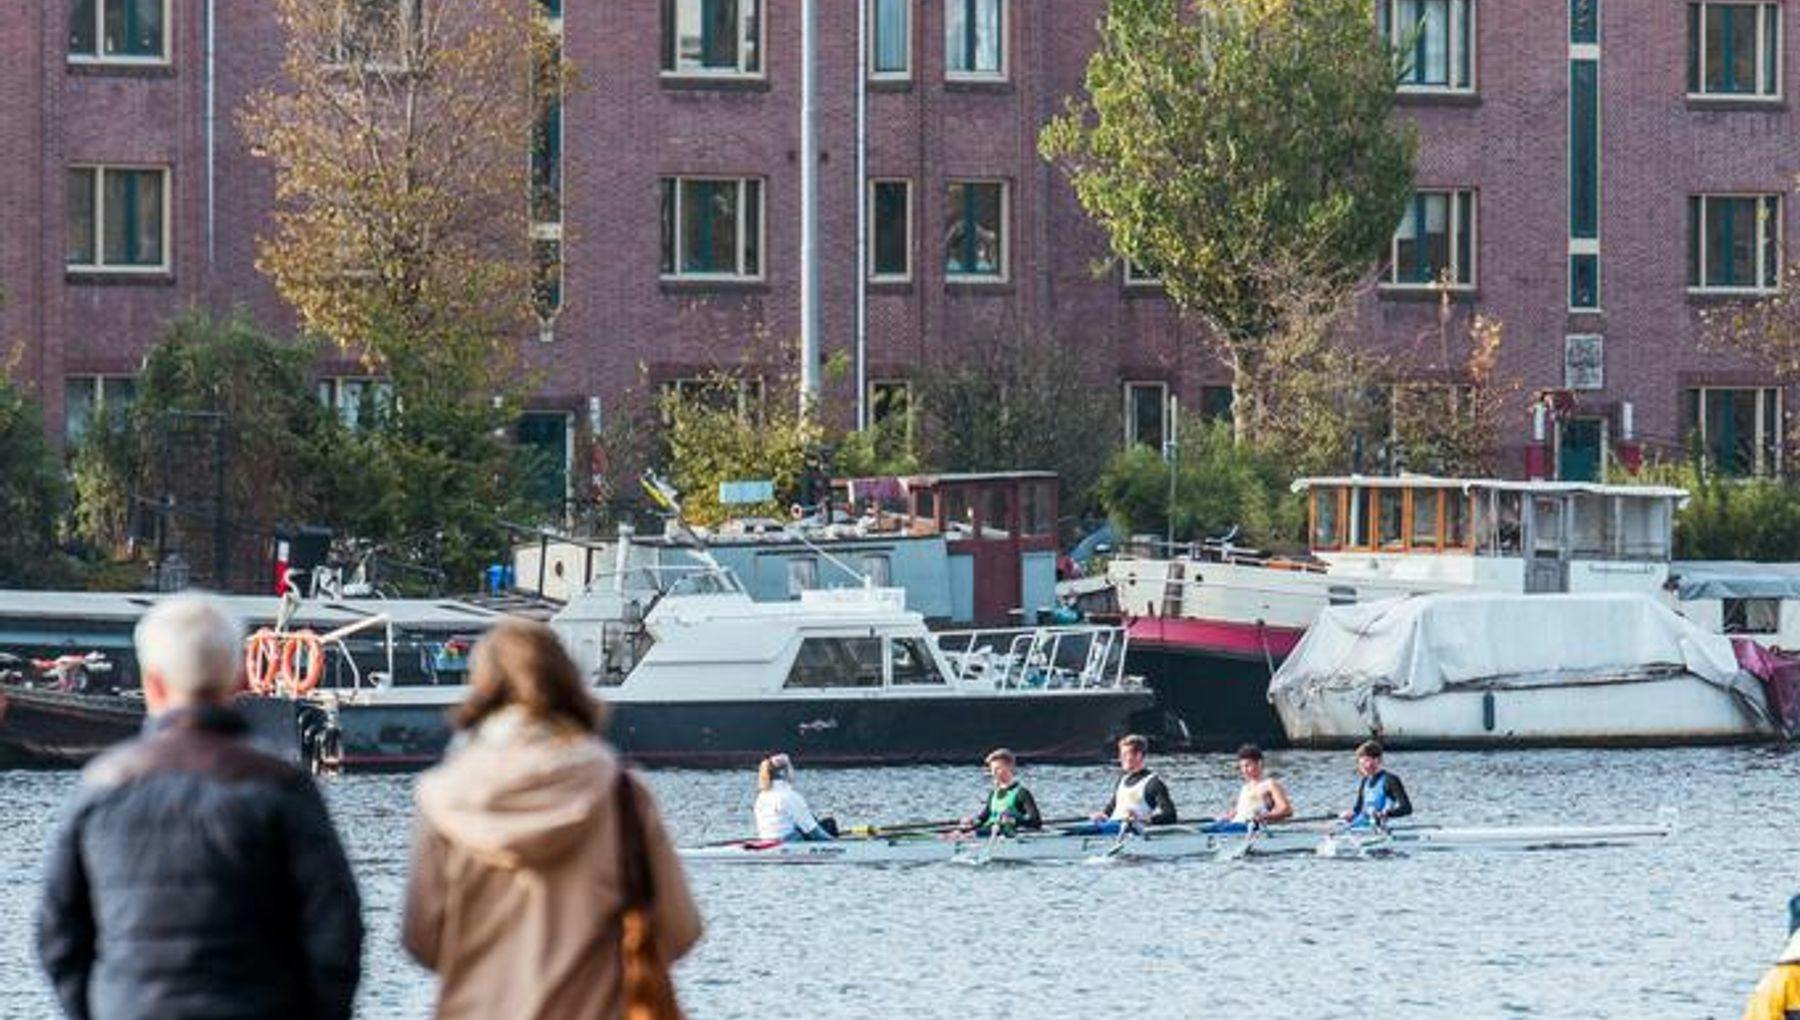 Rowing race at the Amstel canal